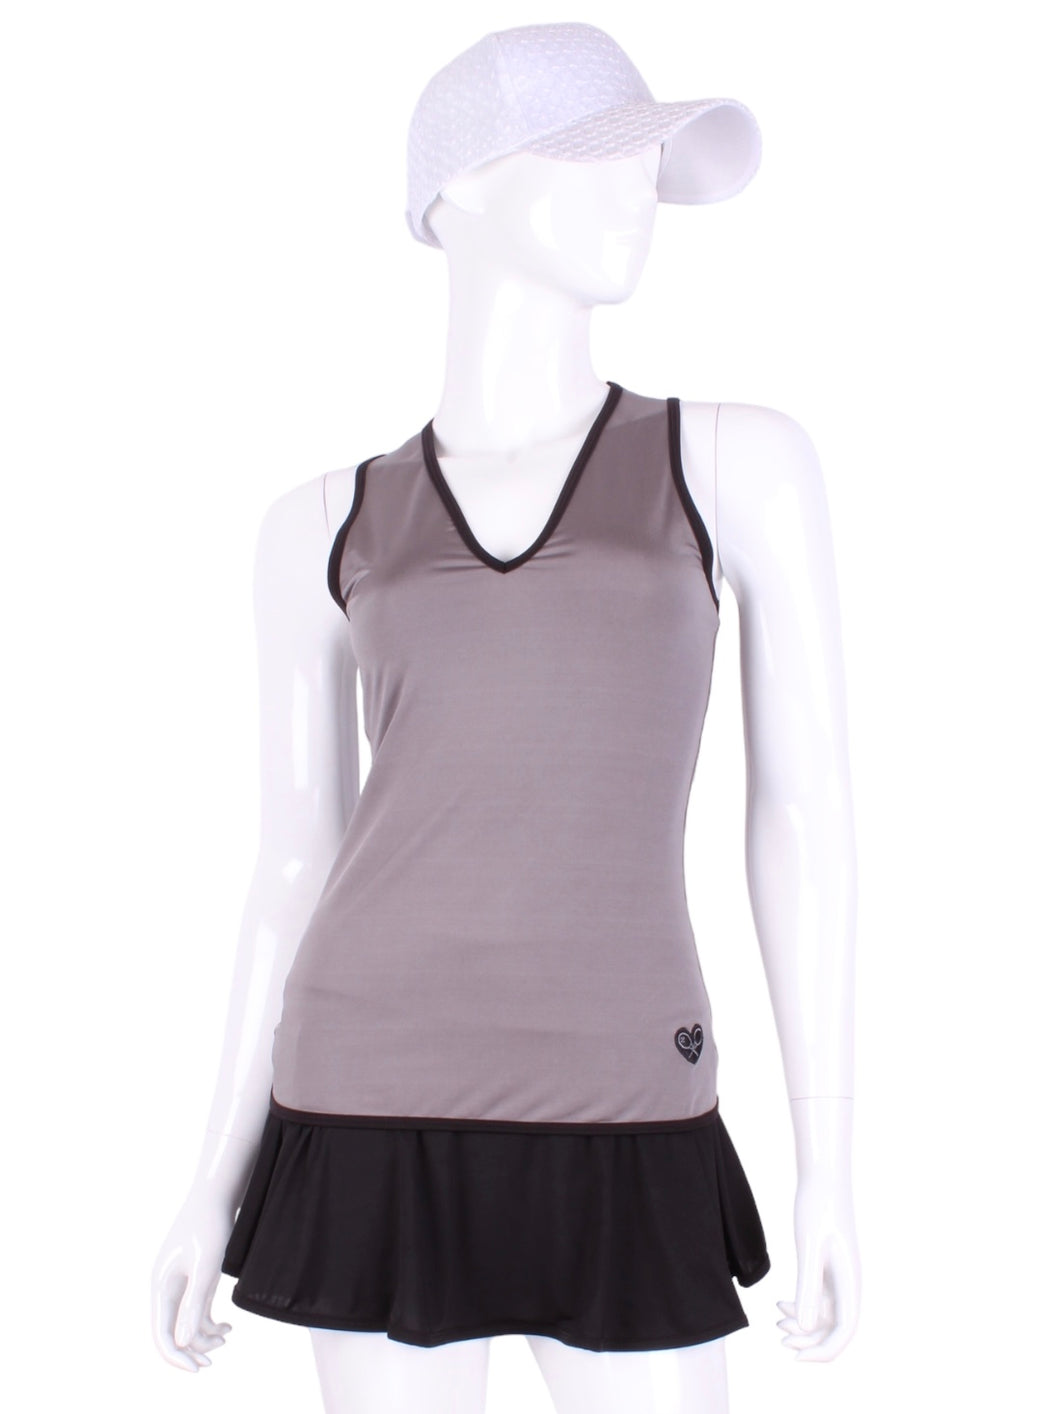 Straight Back Vee Tank Grey. The simply elegant Vee Tank has a little vee in the front and a straight back.  Designed by a tennis player for comfort AND luxury - the pattern is made for a real woman’s body with curves and all!  The material is stretchy and soft.  As with all of our apparel - it’s designed and hand made in Downtown Los Angeles - from imported fabric.